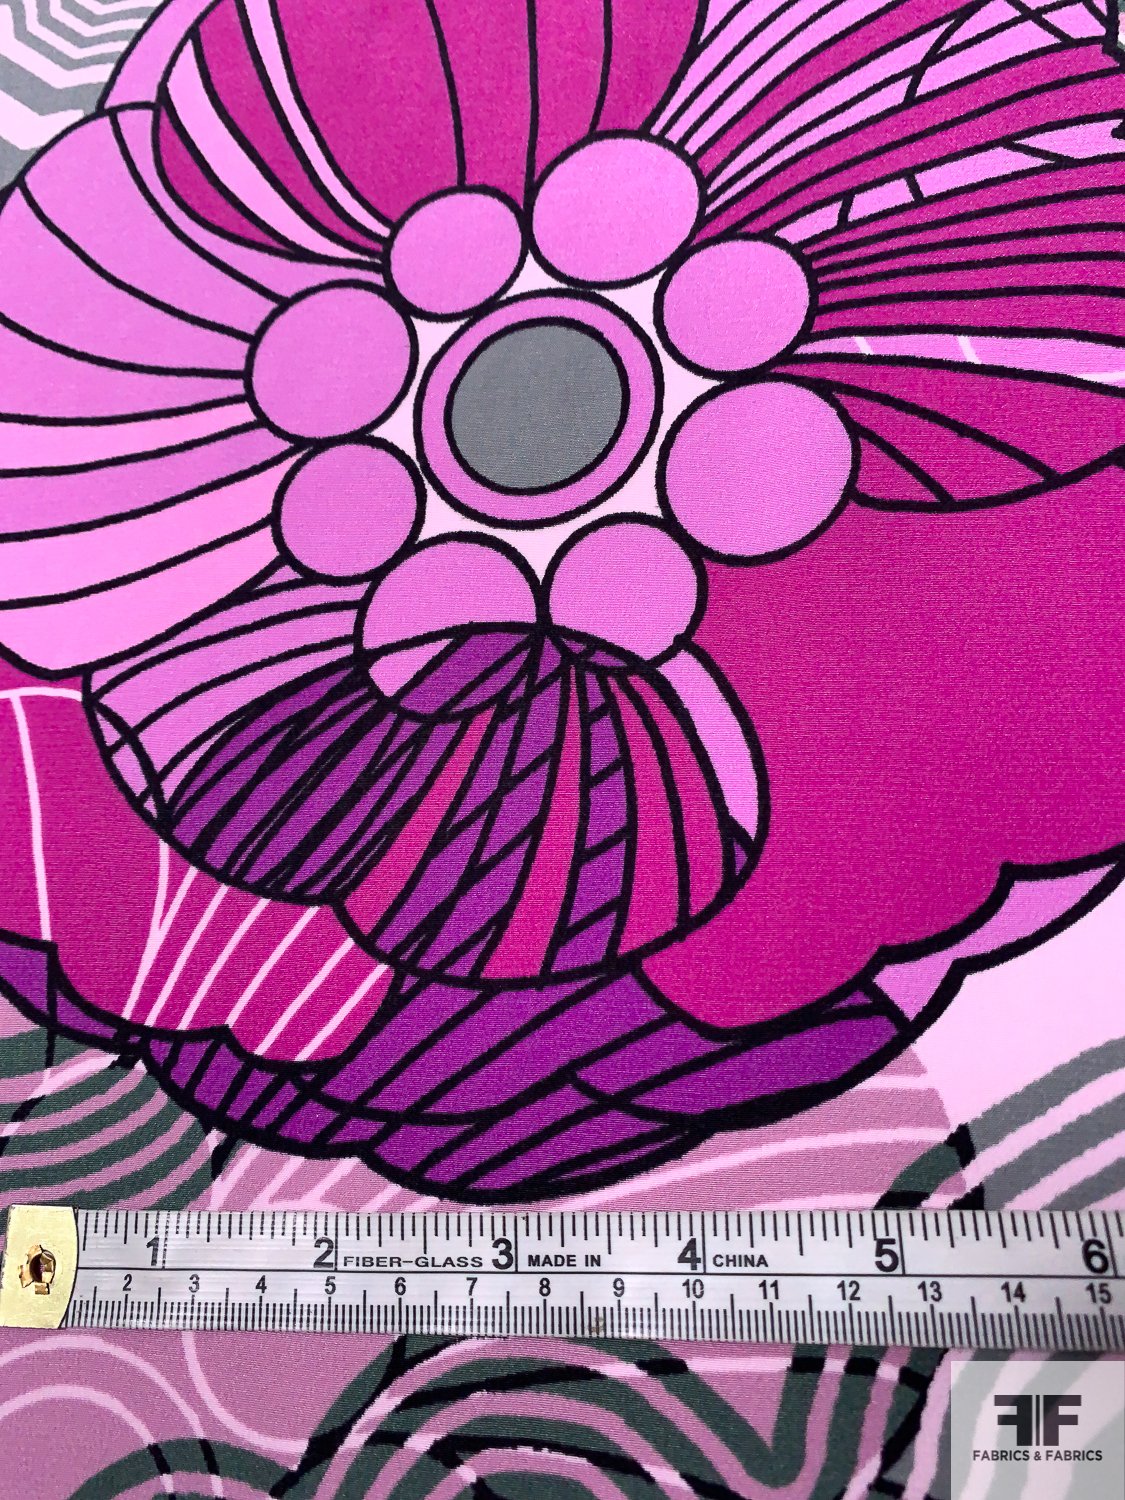 Groovy Large-Scale Floral Printed Silk Crepe de Chine - Orchid / Light Pinks  / Magenta / Grey